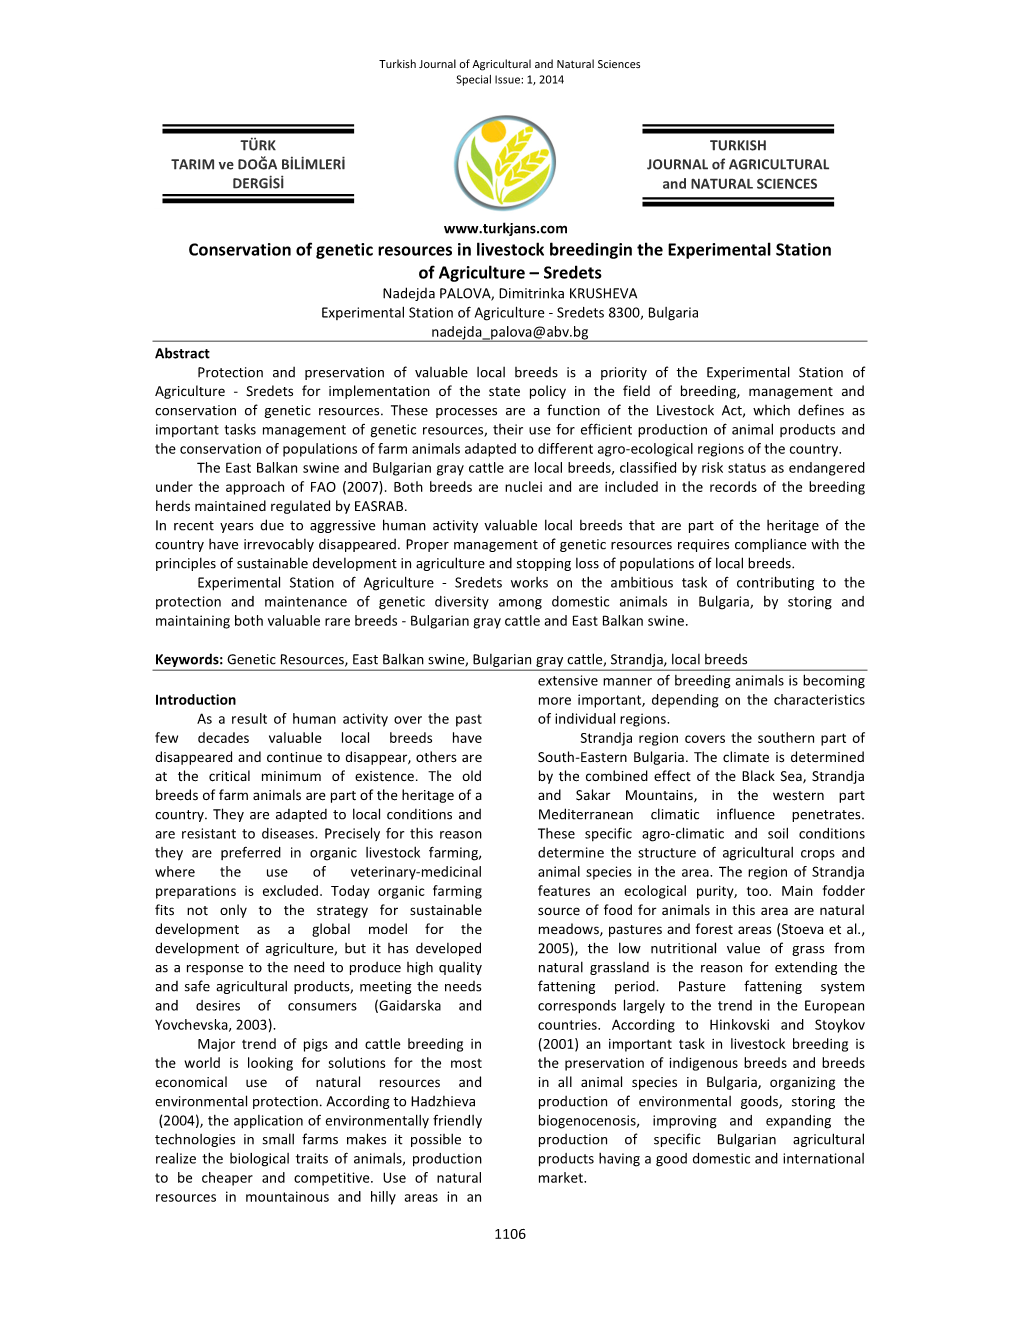 Conservation of Genetic Resources in Livestock Breedingin The